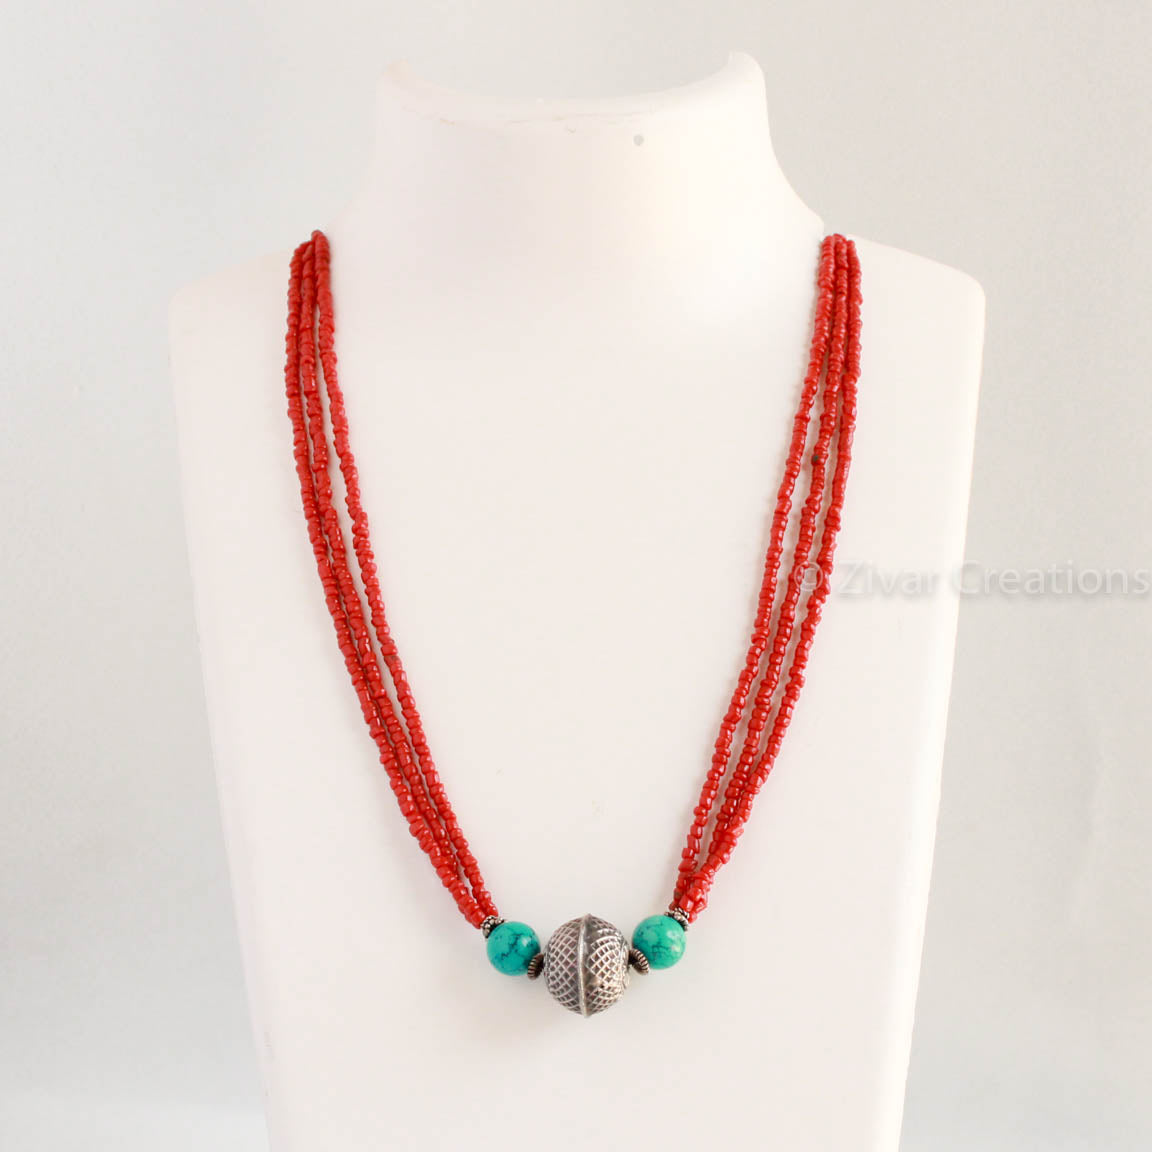 Oxidised Pure Silver Bead with coral and turquoise combination necklace